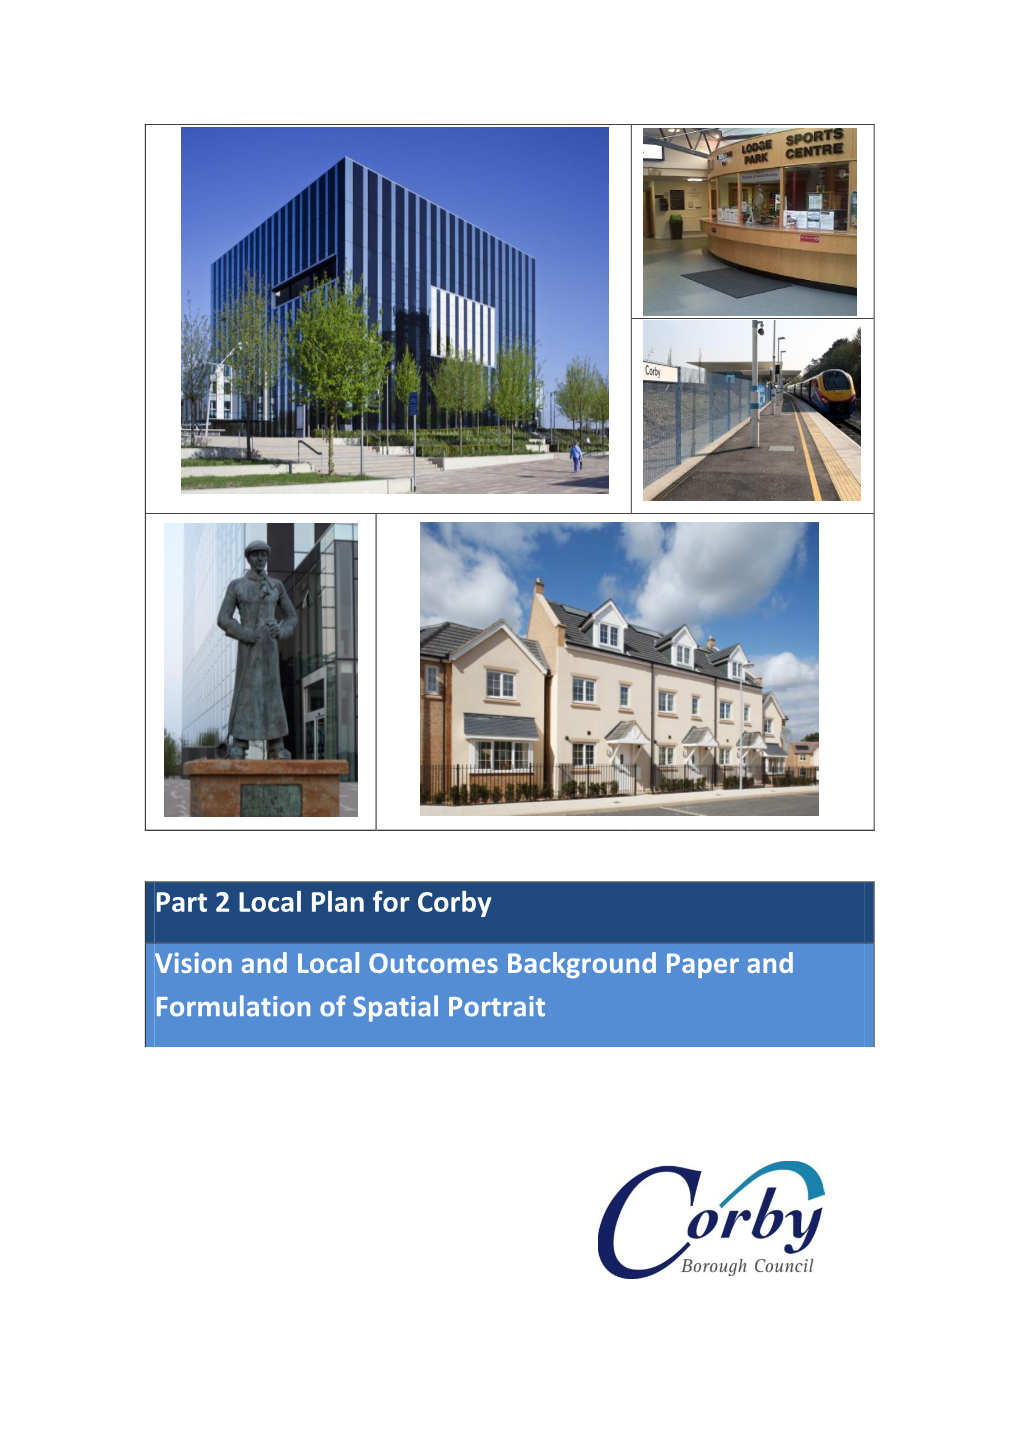 Part 2 Local Plan for Corby Vision and Local Outcomes Background Paper and Formulation of Spatial Portrait